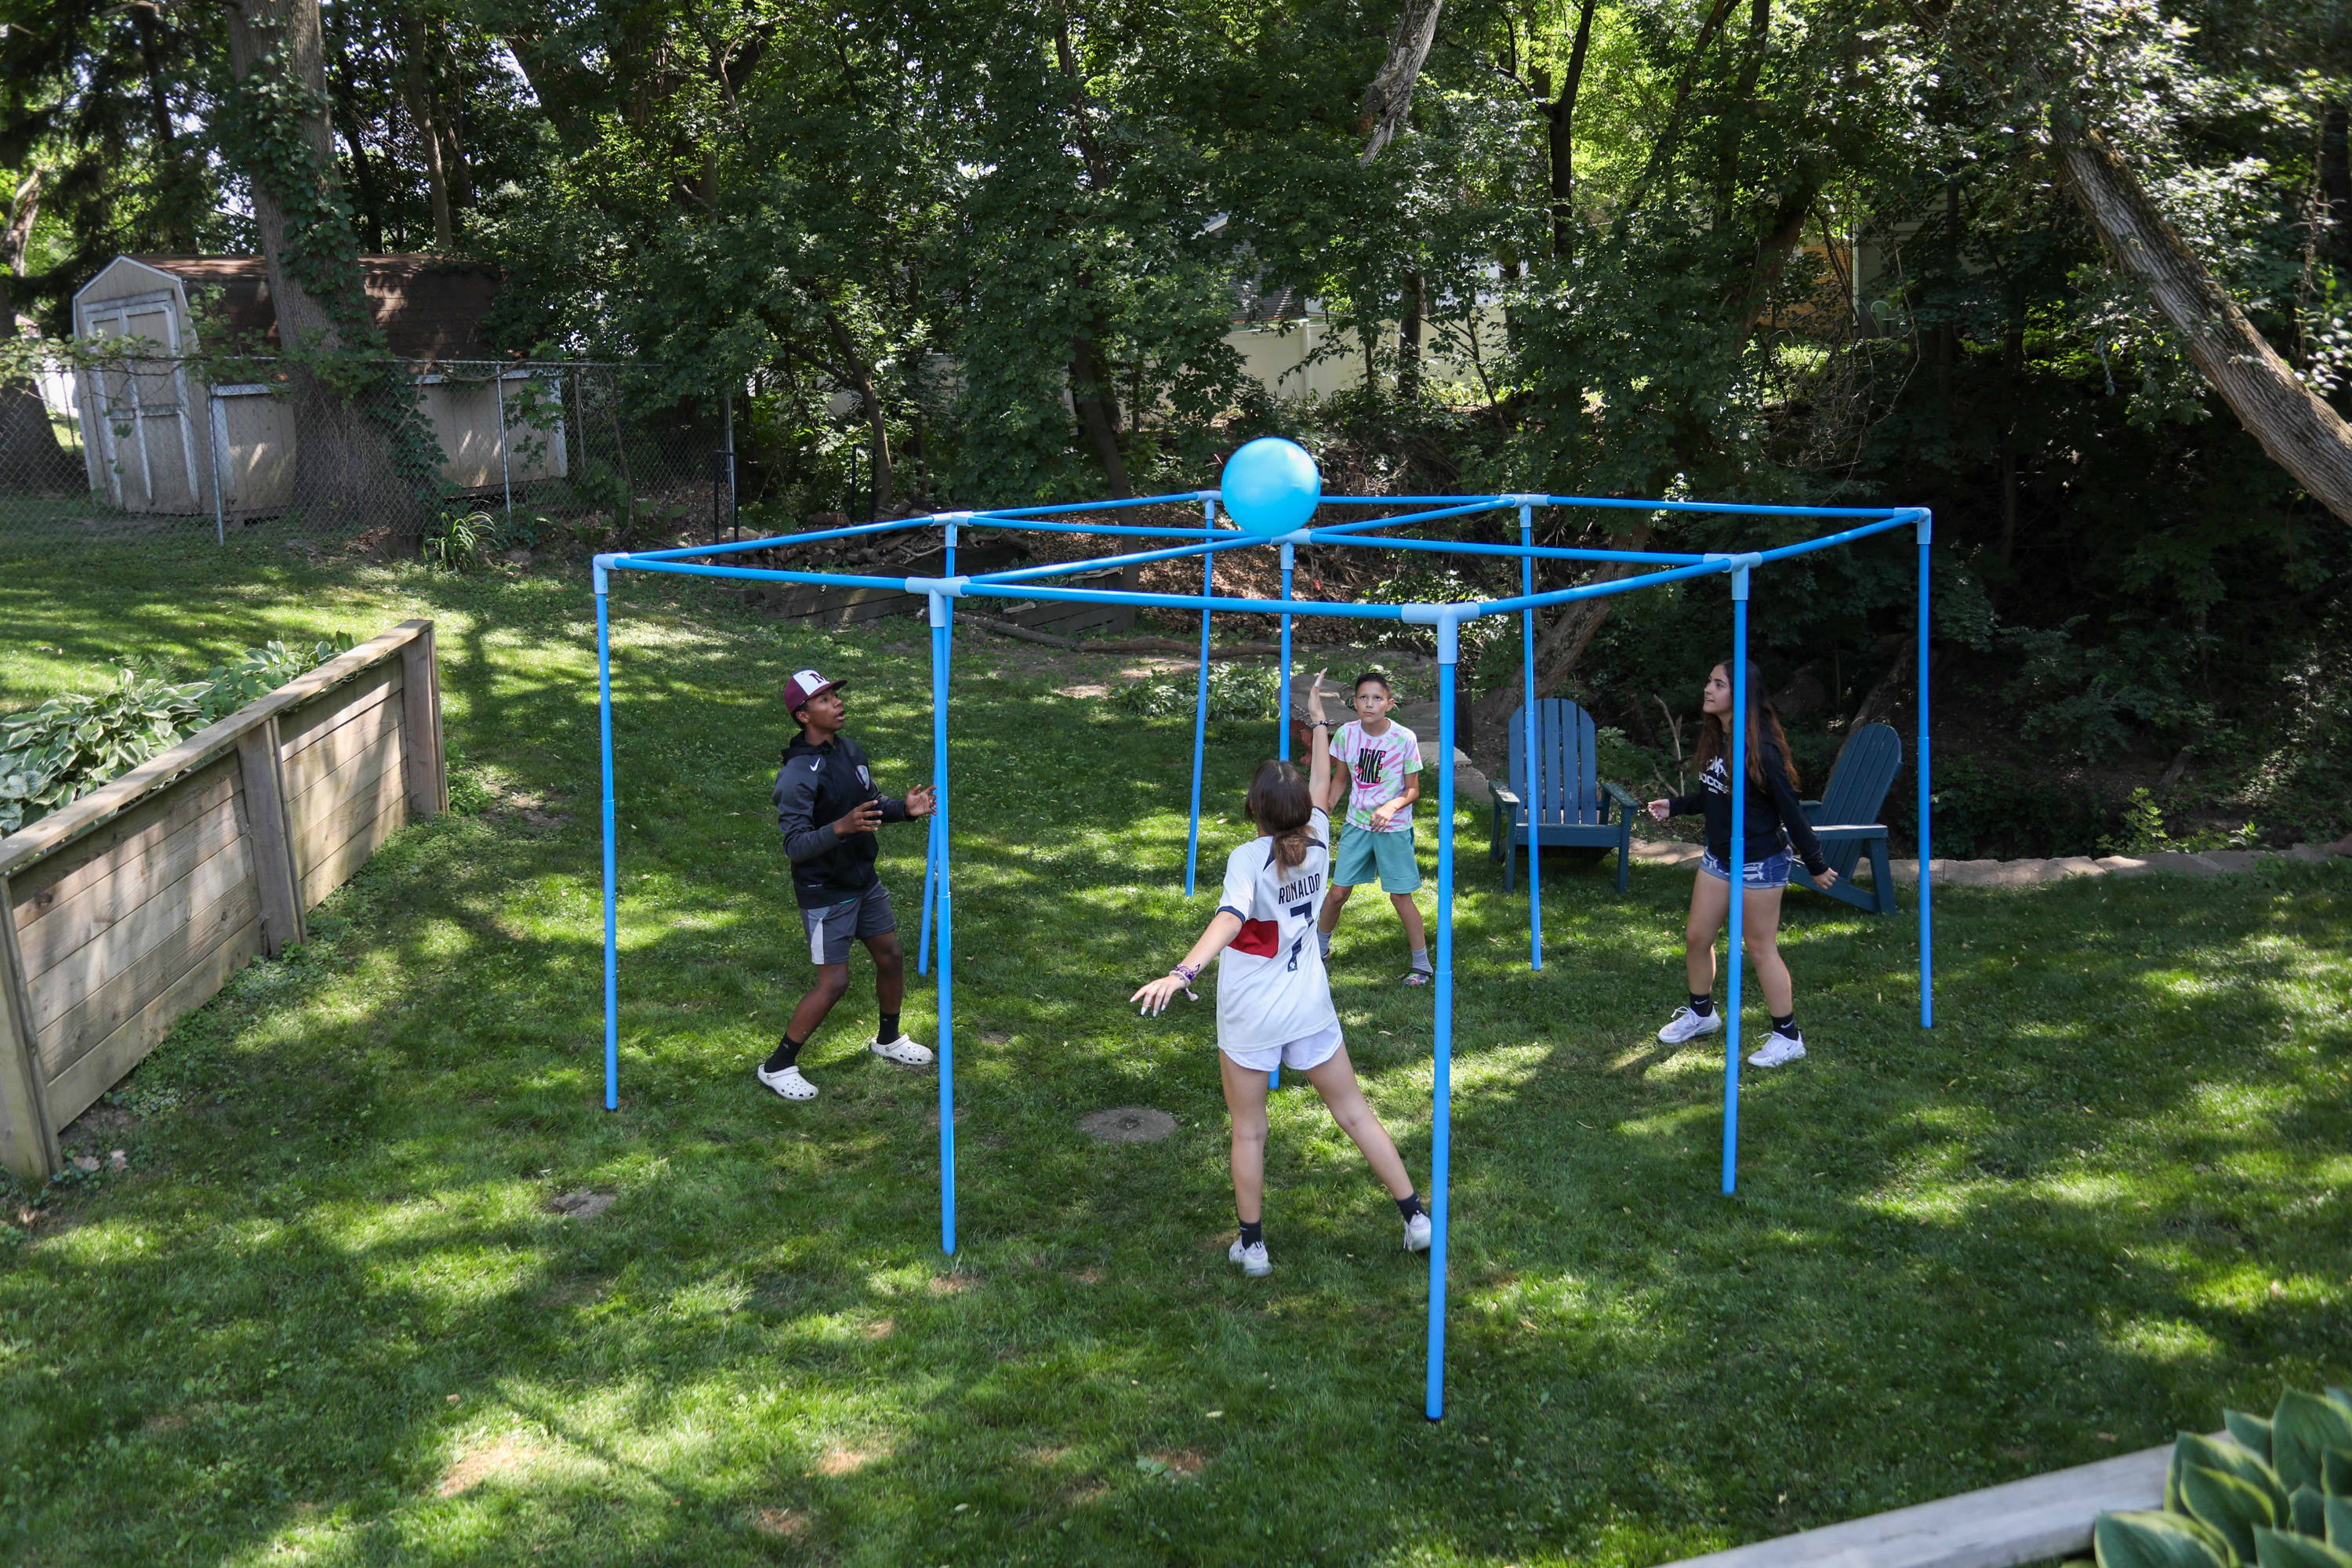 If you’re looking for a new way to connect with your family, set up 4 Square in the Air. 